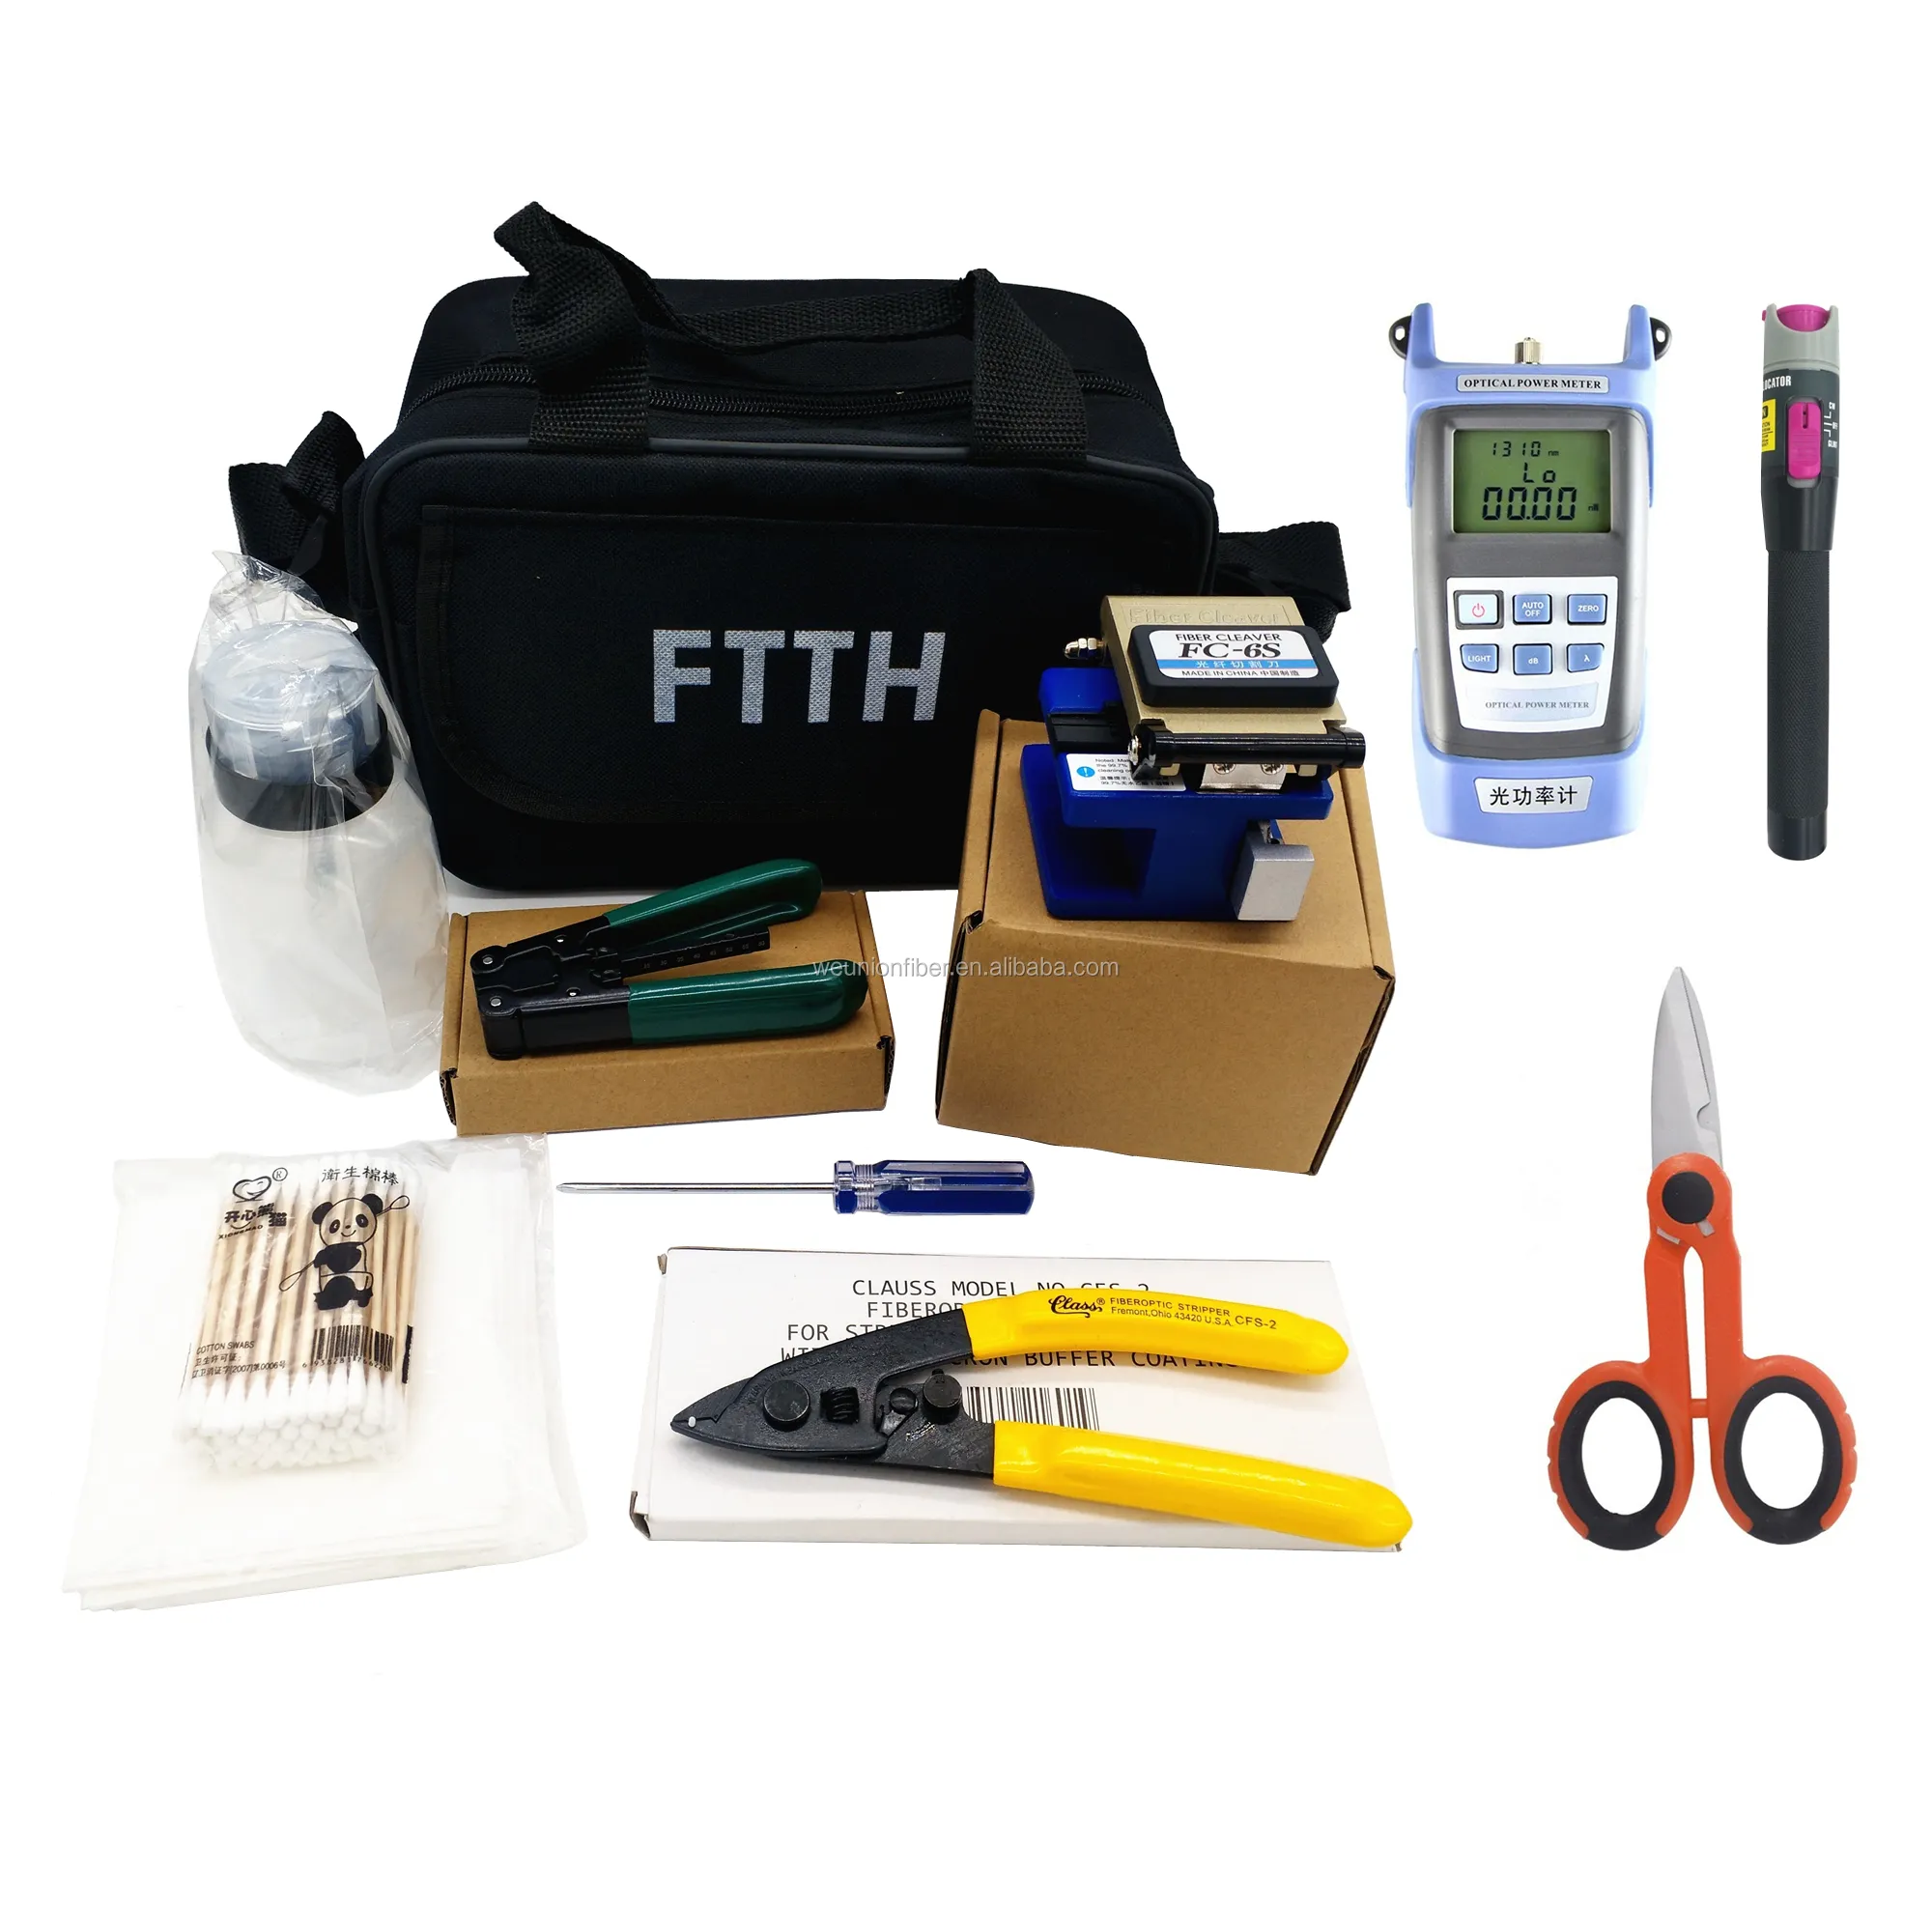 Component Fiber Optic Tool kits with Cleaver Fiber Stripper Optical Power Meter FTTH Tool Kits